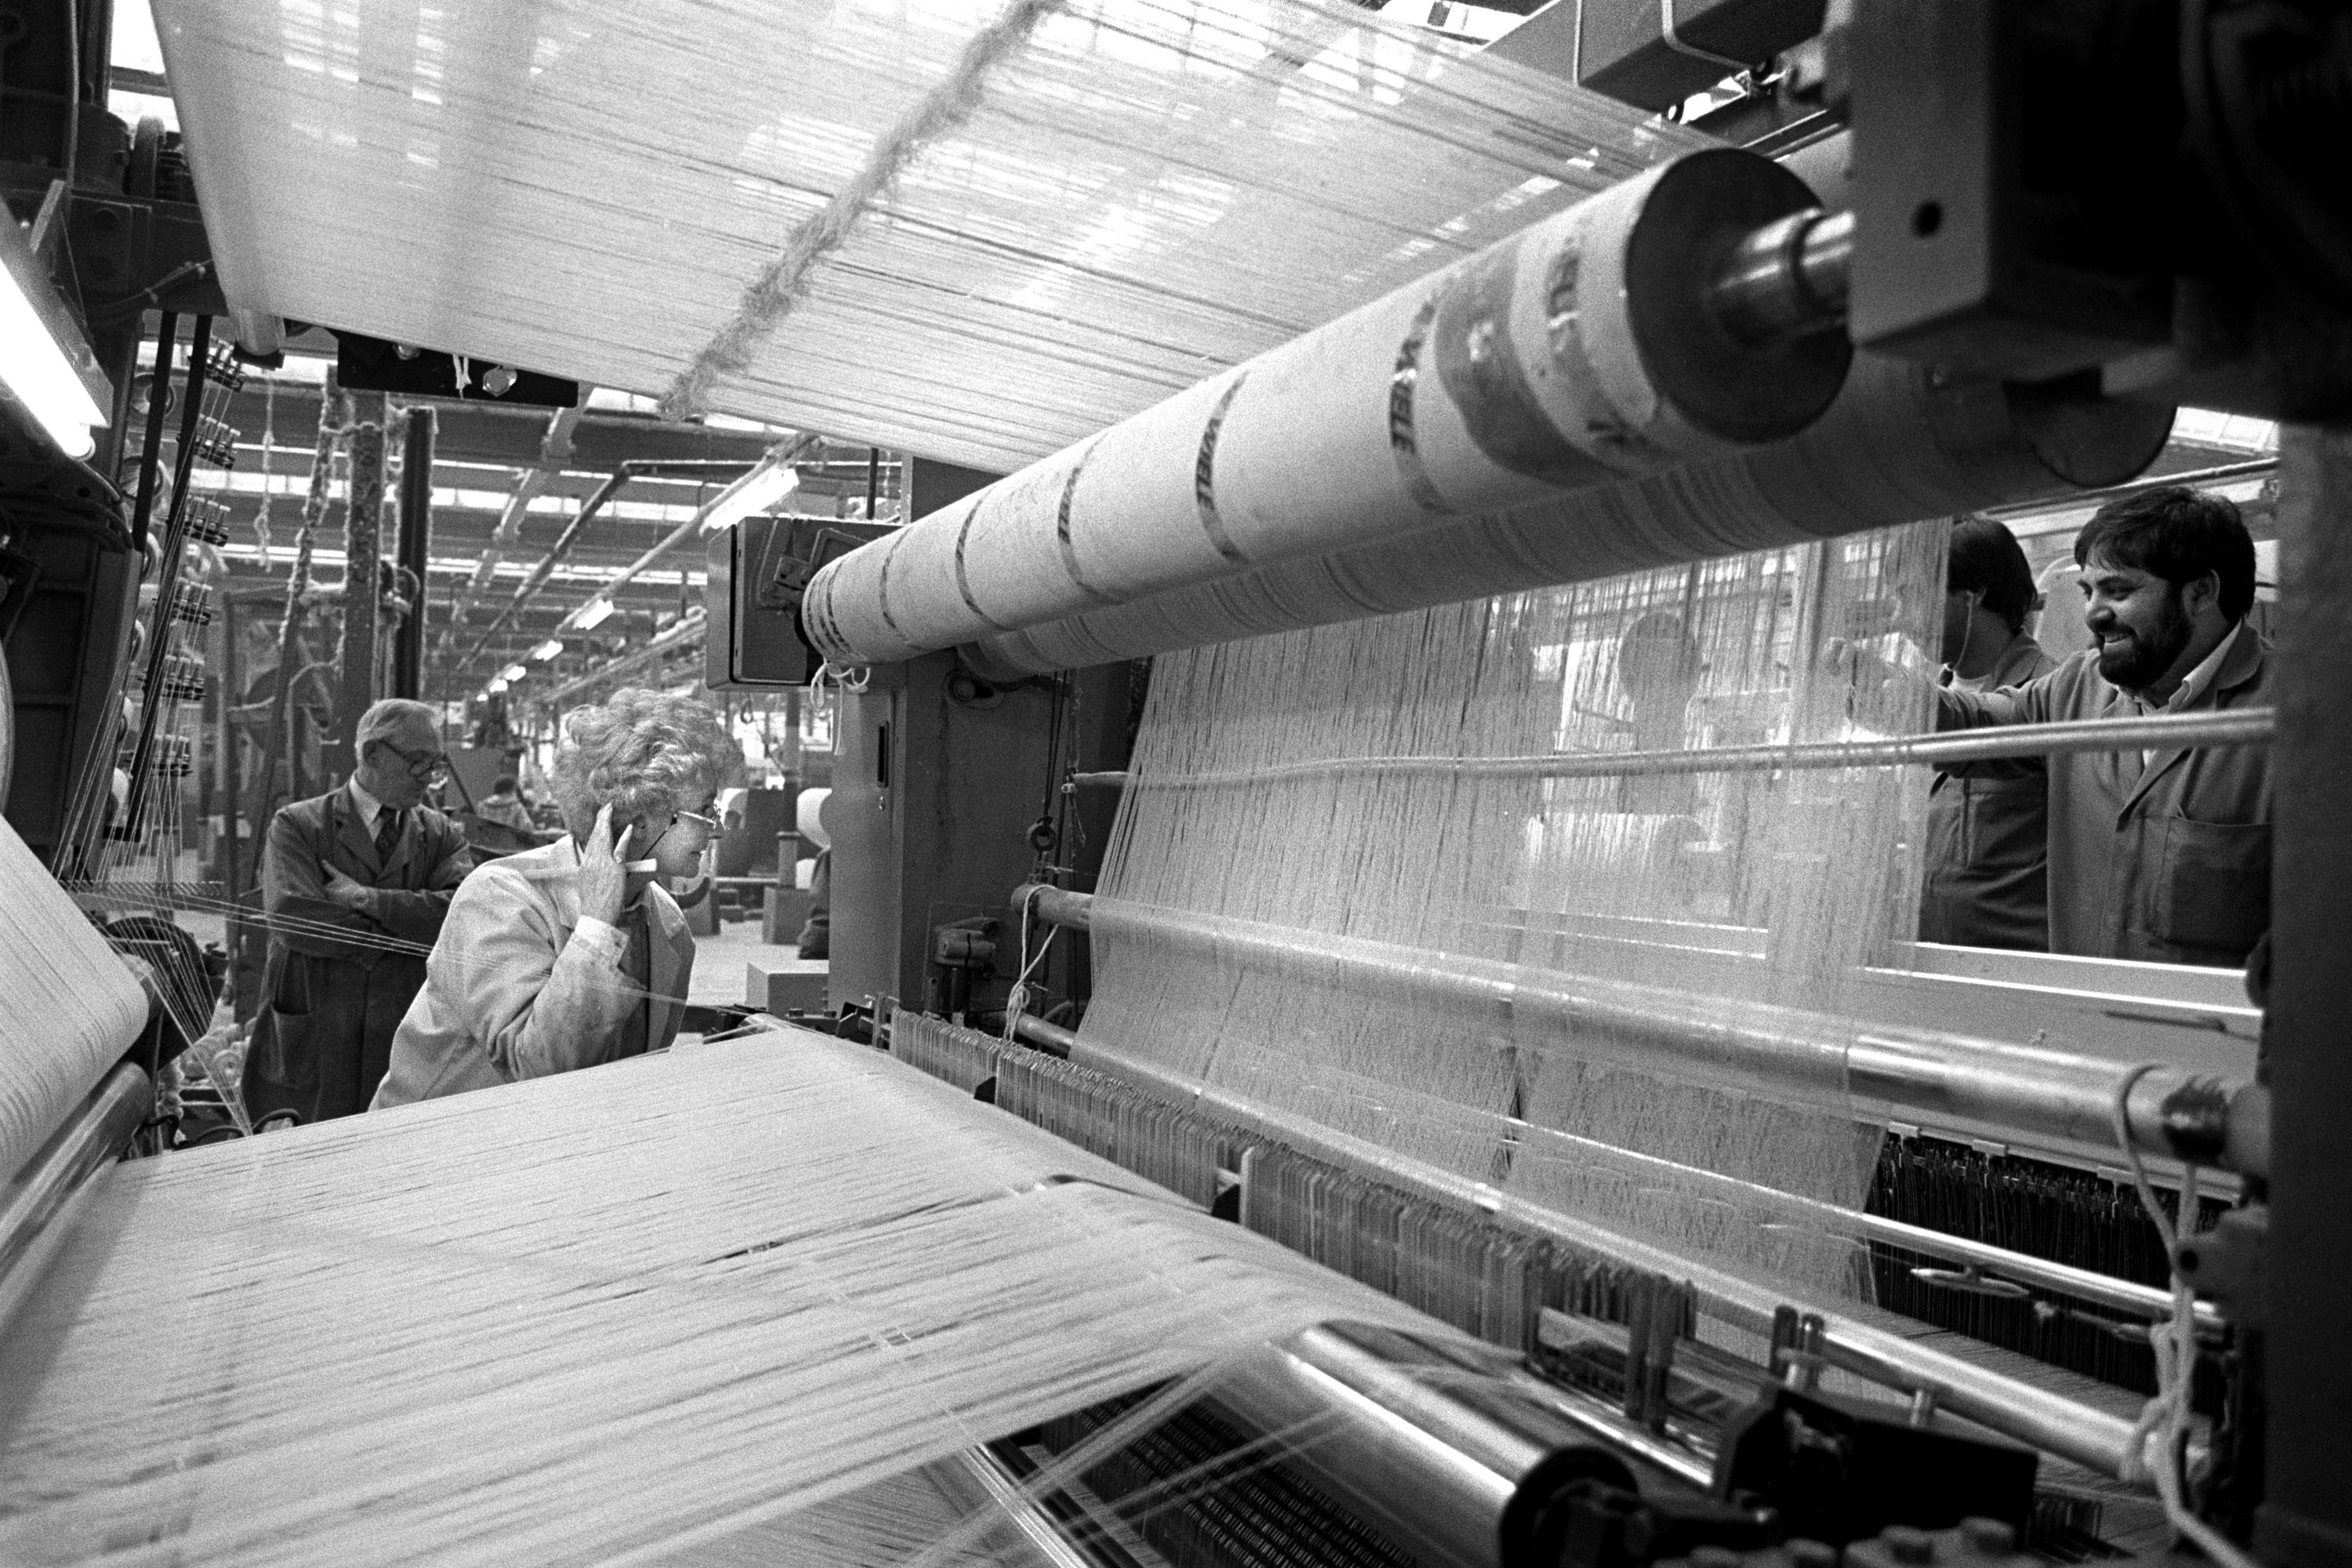 Workers in the weaving shed at Lister’s Manningham Mills, 1989